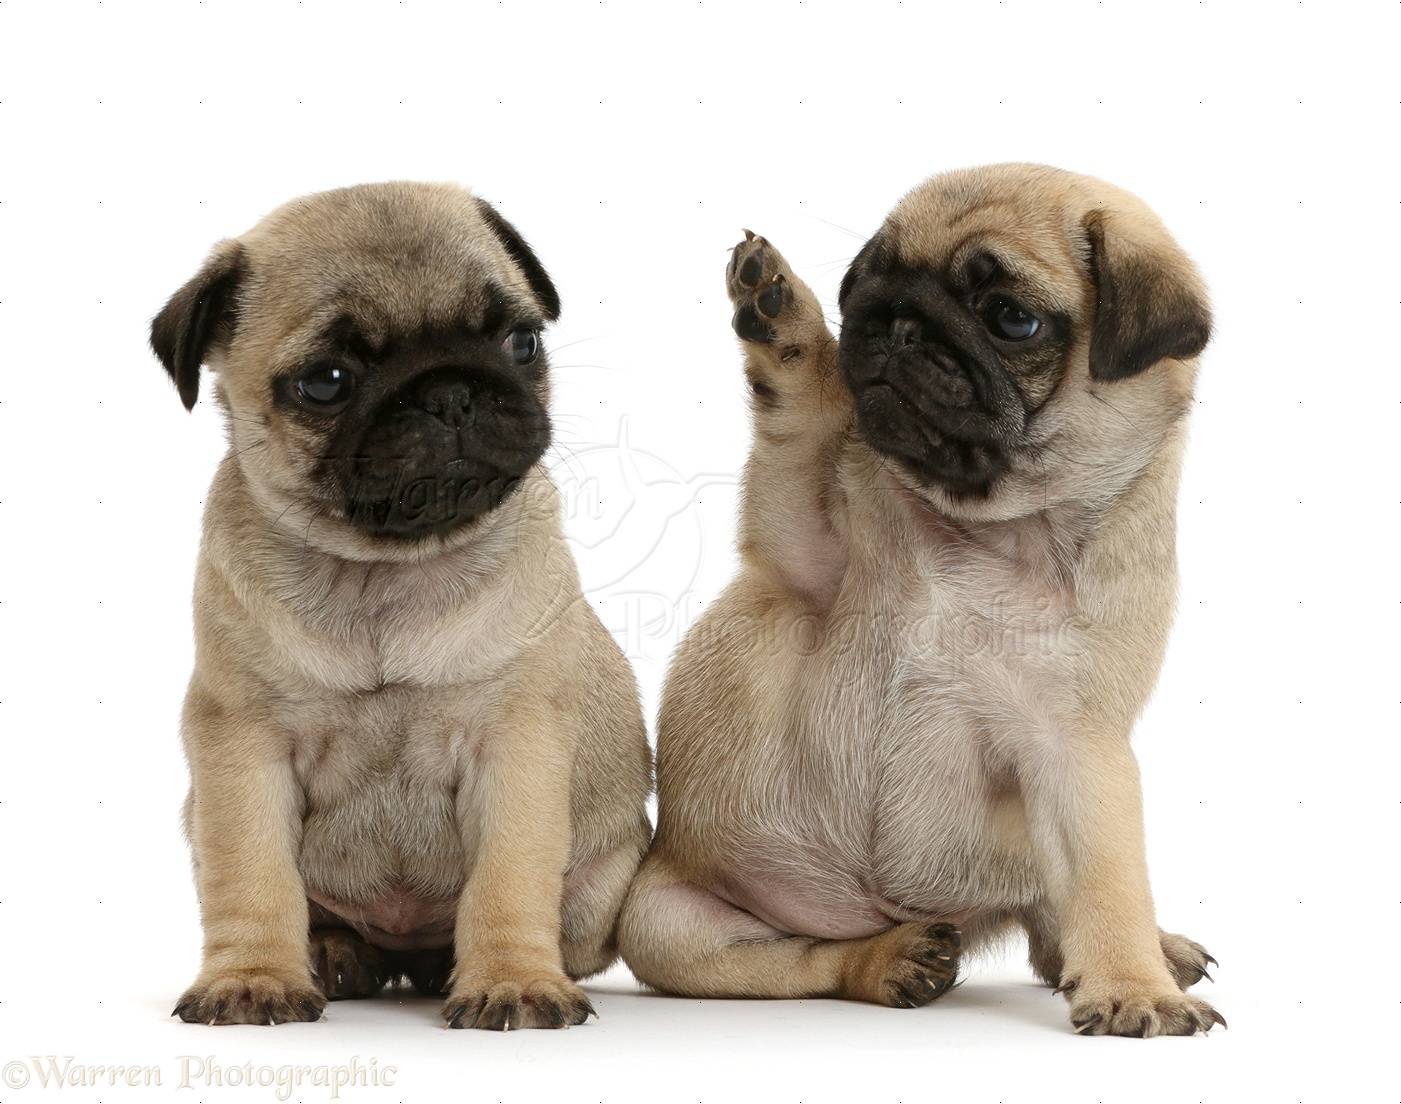 41994-Pug-puppies-one-waving-to-the-other-white-background.jpg